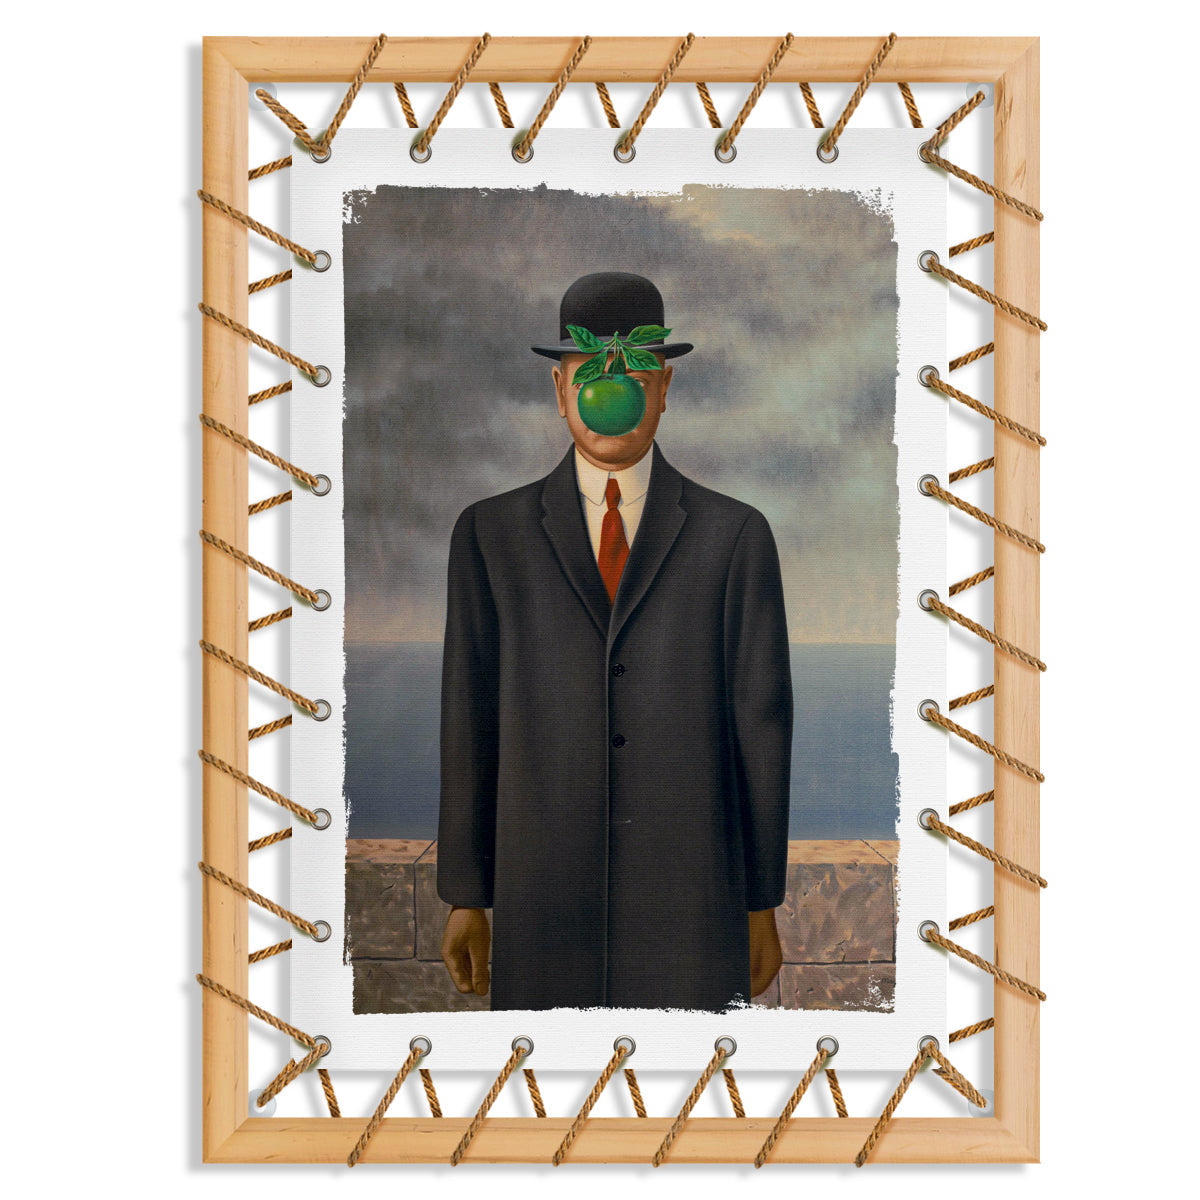 Tensotela 70x95 cm - Magritte The Son of Man - PlastiWood(14558274)